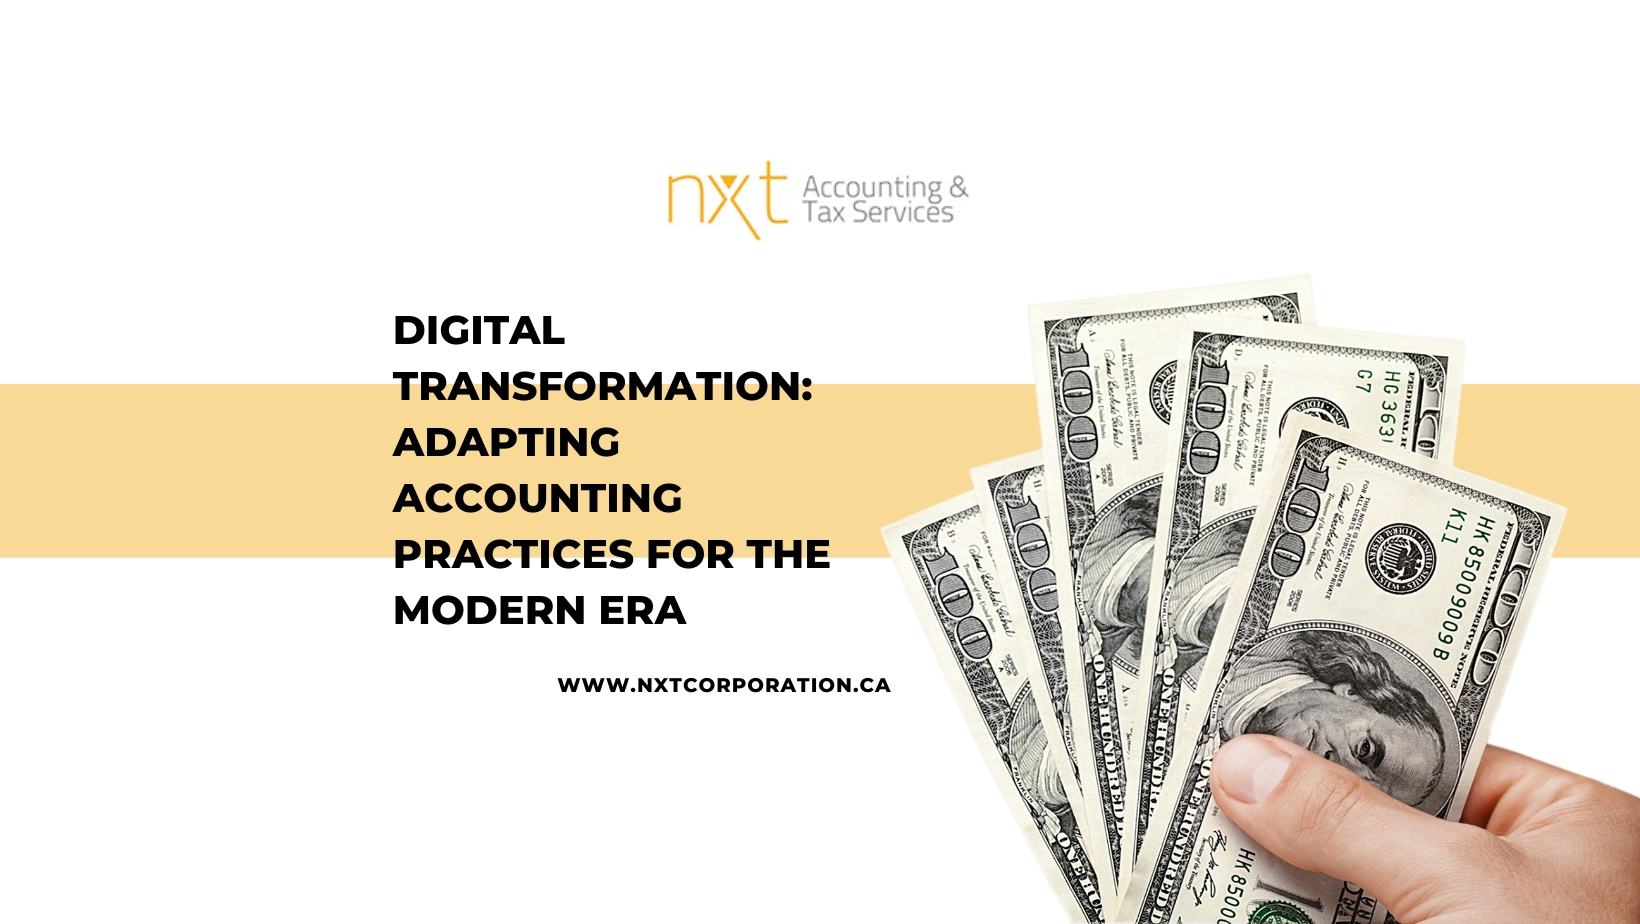 Digital Transformation- Adapting Accounting Practices for the Modern Era